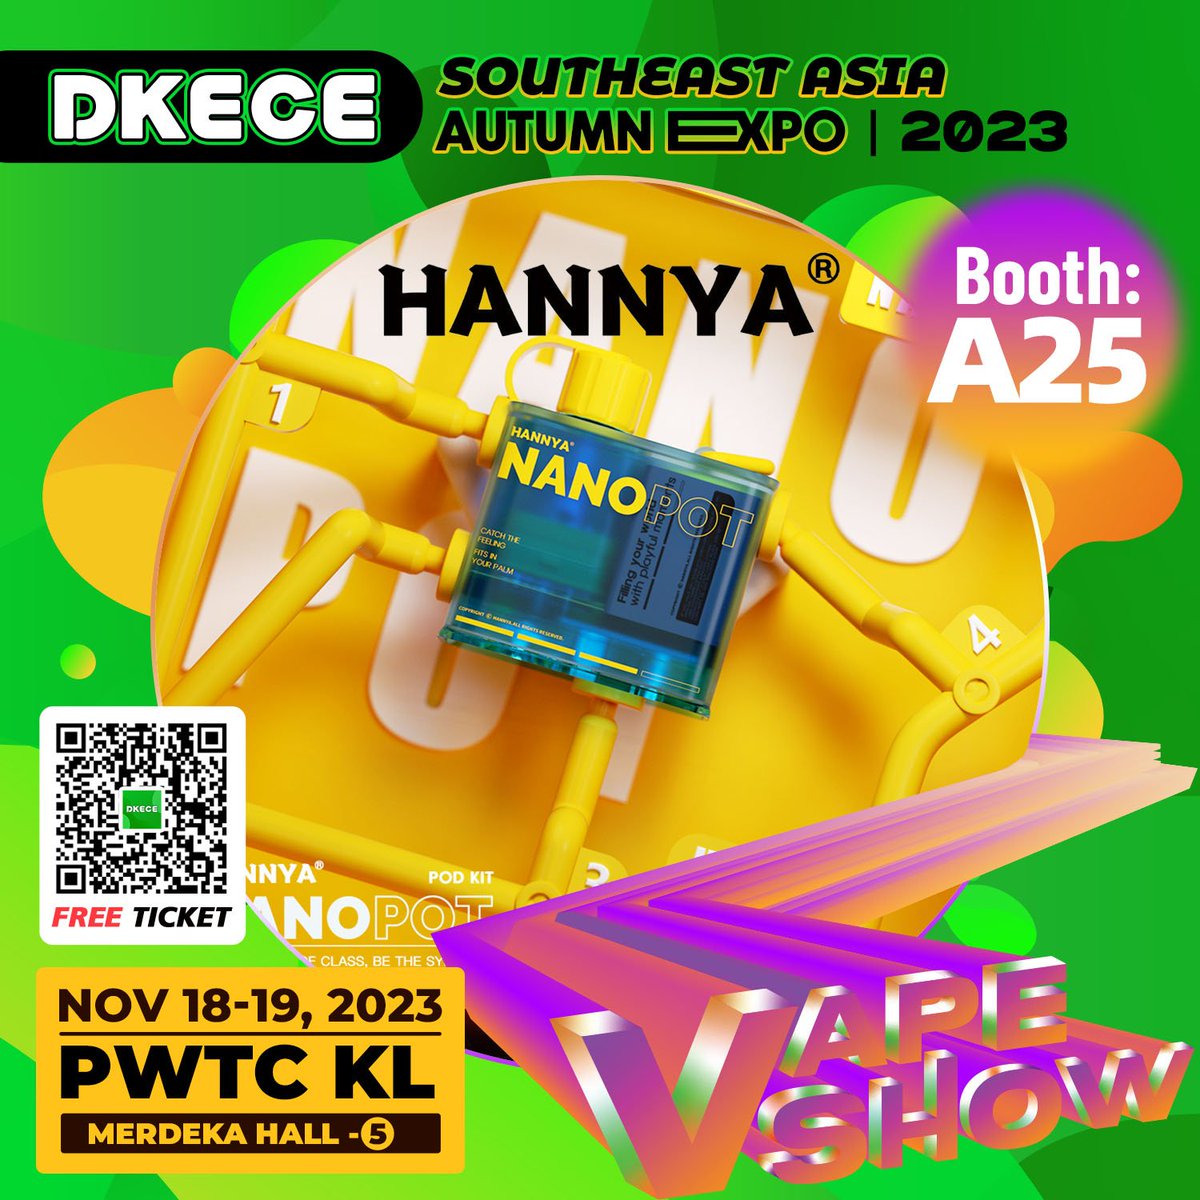 Where is the homies in Malaysia!!! I want to see you guys 18-19th, Nov!!! I`m so excited~~

#vapelustion #hannyaairtok #airtok #airtokpod #hannyavape #hannyafam #ticktok #artwork #vapelove #fypage #lightervape #vapeon #vapefam #viral #æspa #betterthings #nanopot #hannyafam #reels